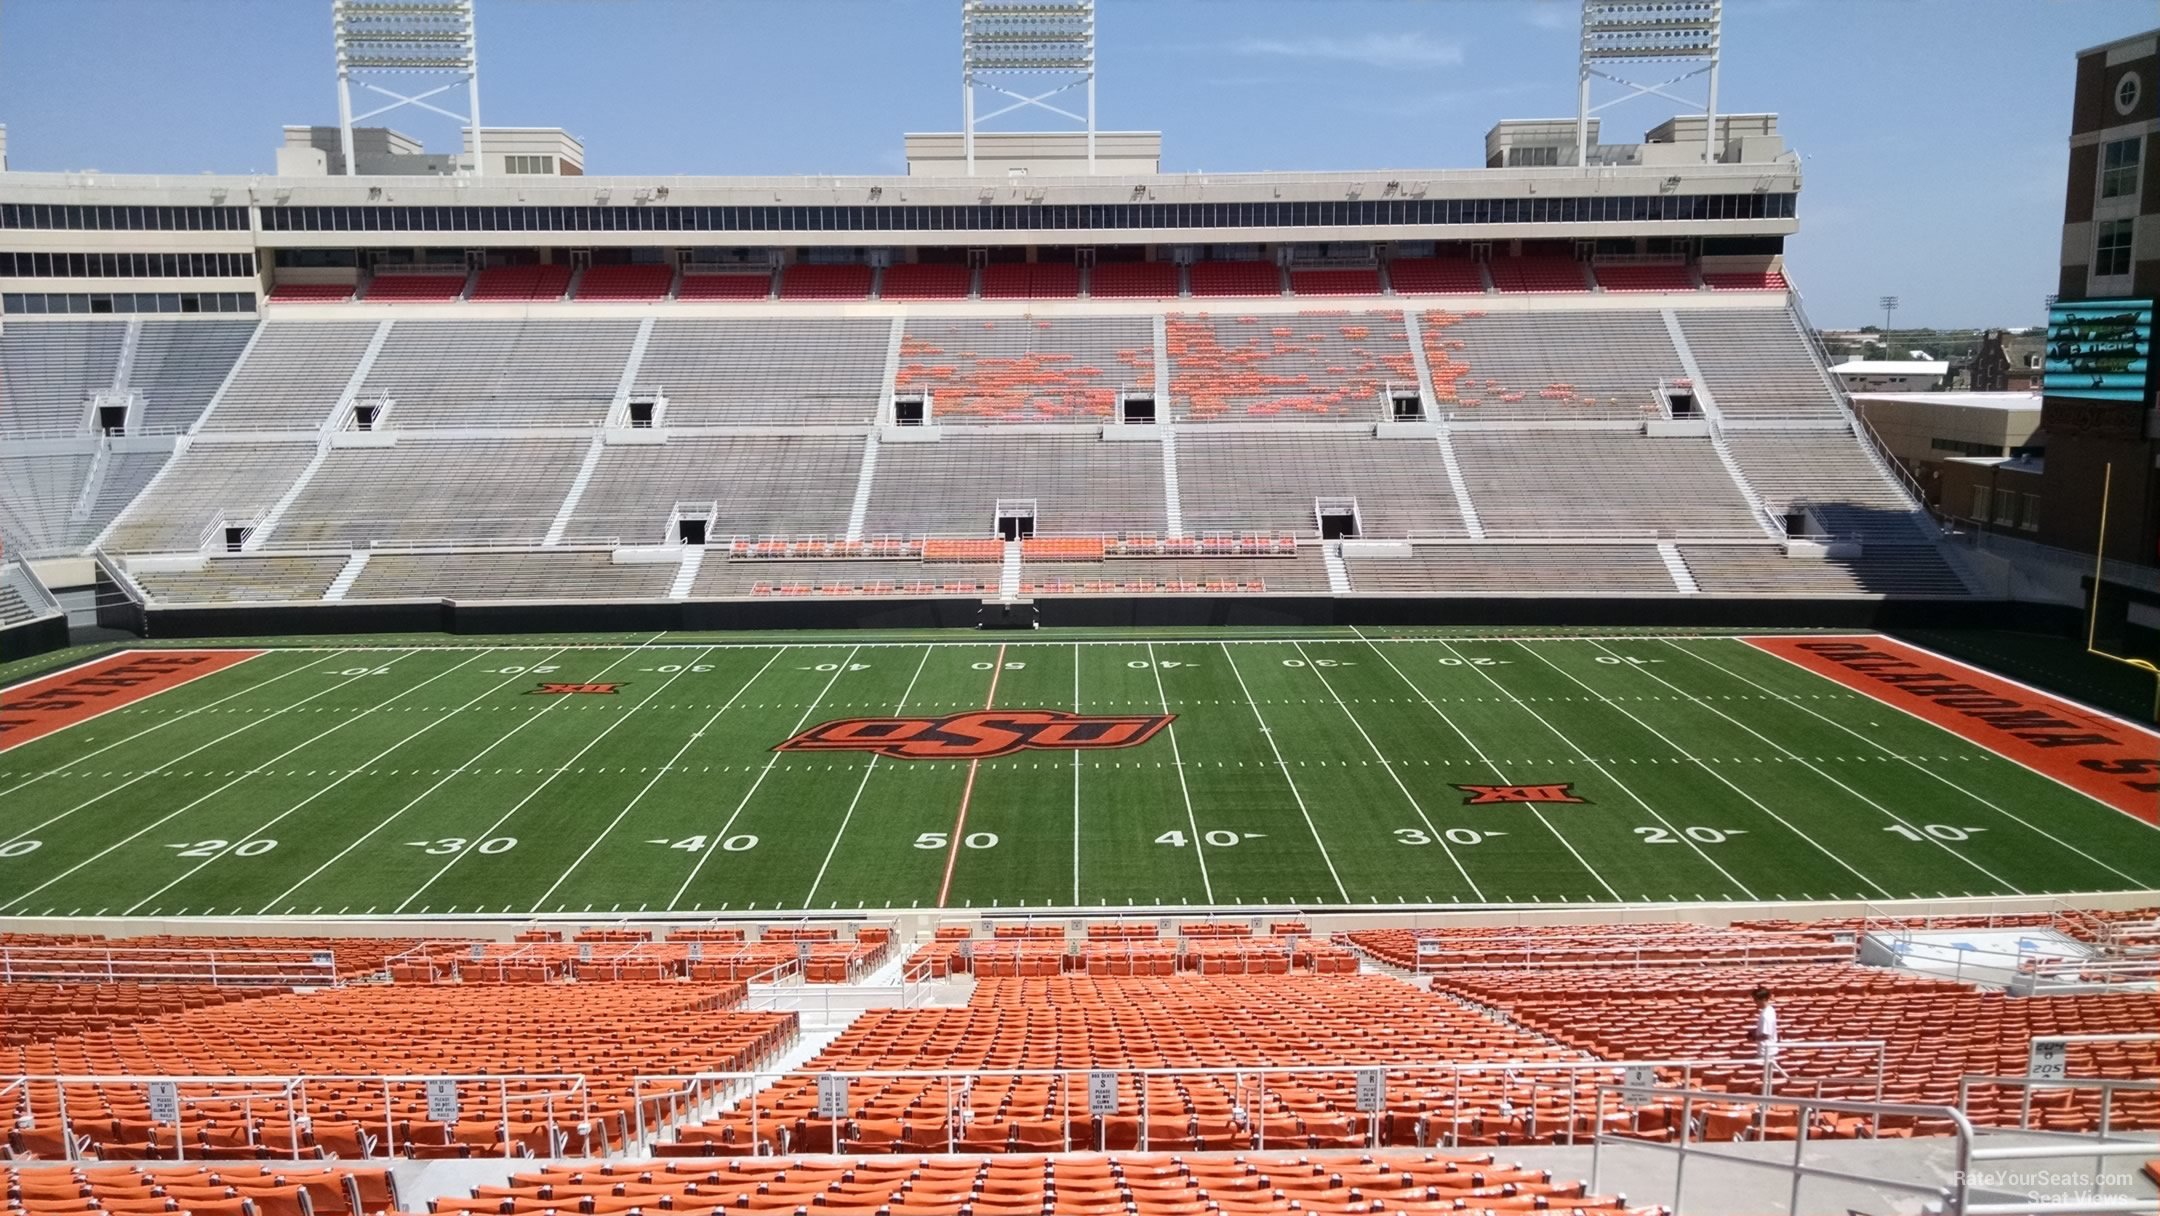 section 305, row 19 seat view  - boone pickens stadium